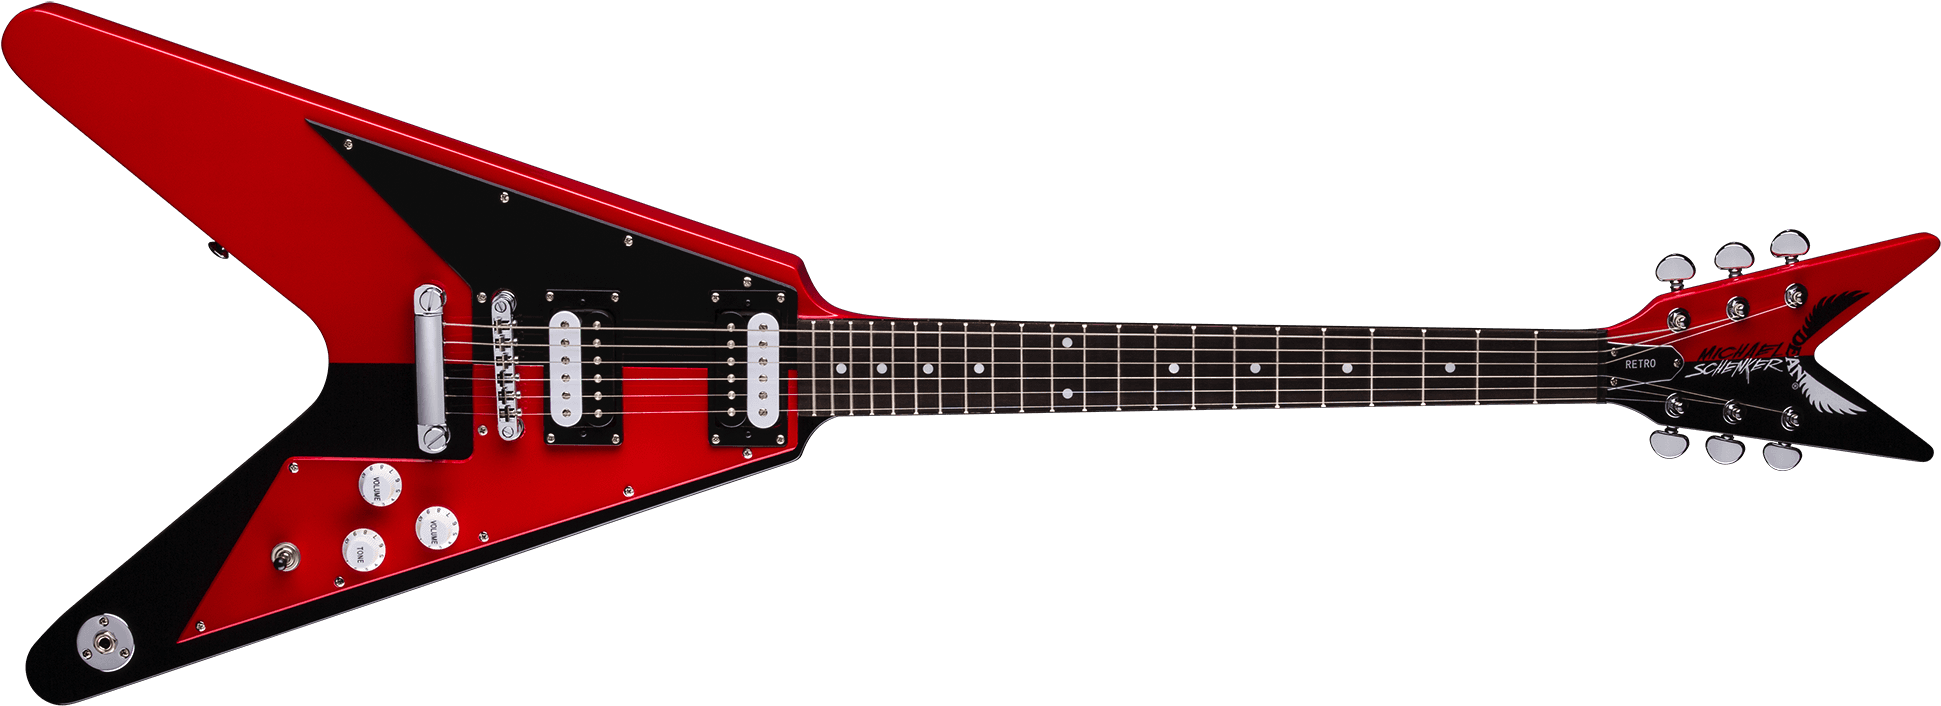 Guitar Electric Red Free Transparent Image HQ PNG Image